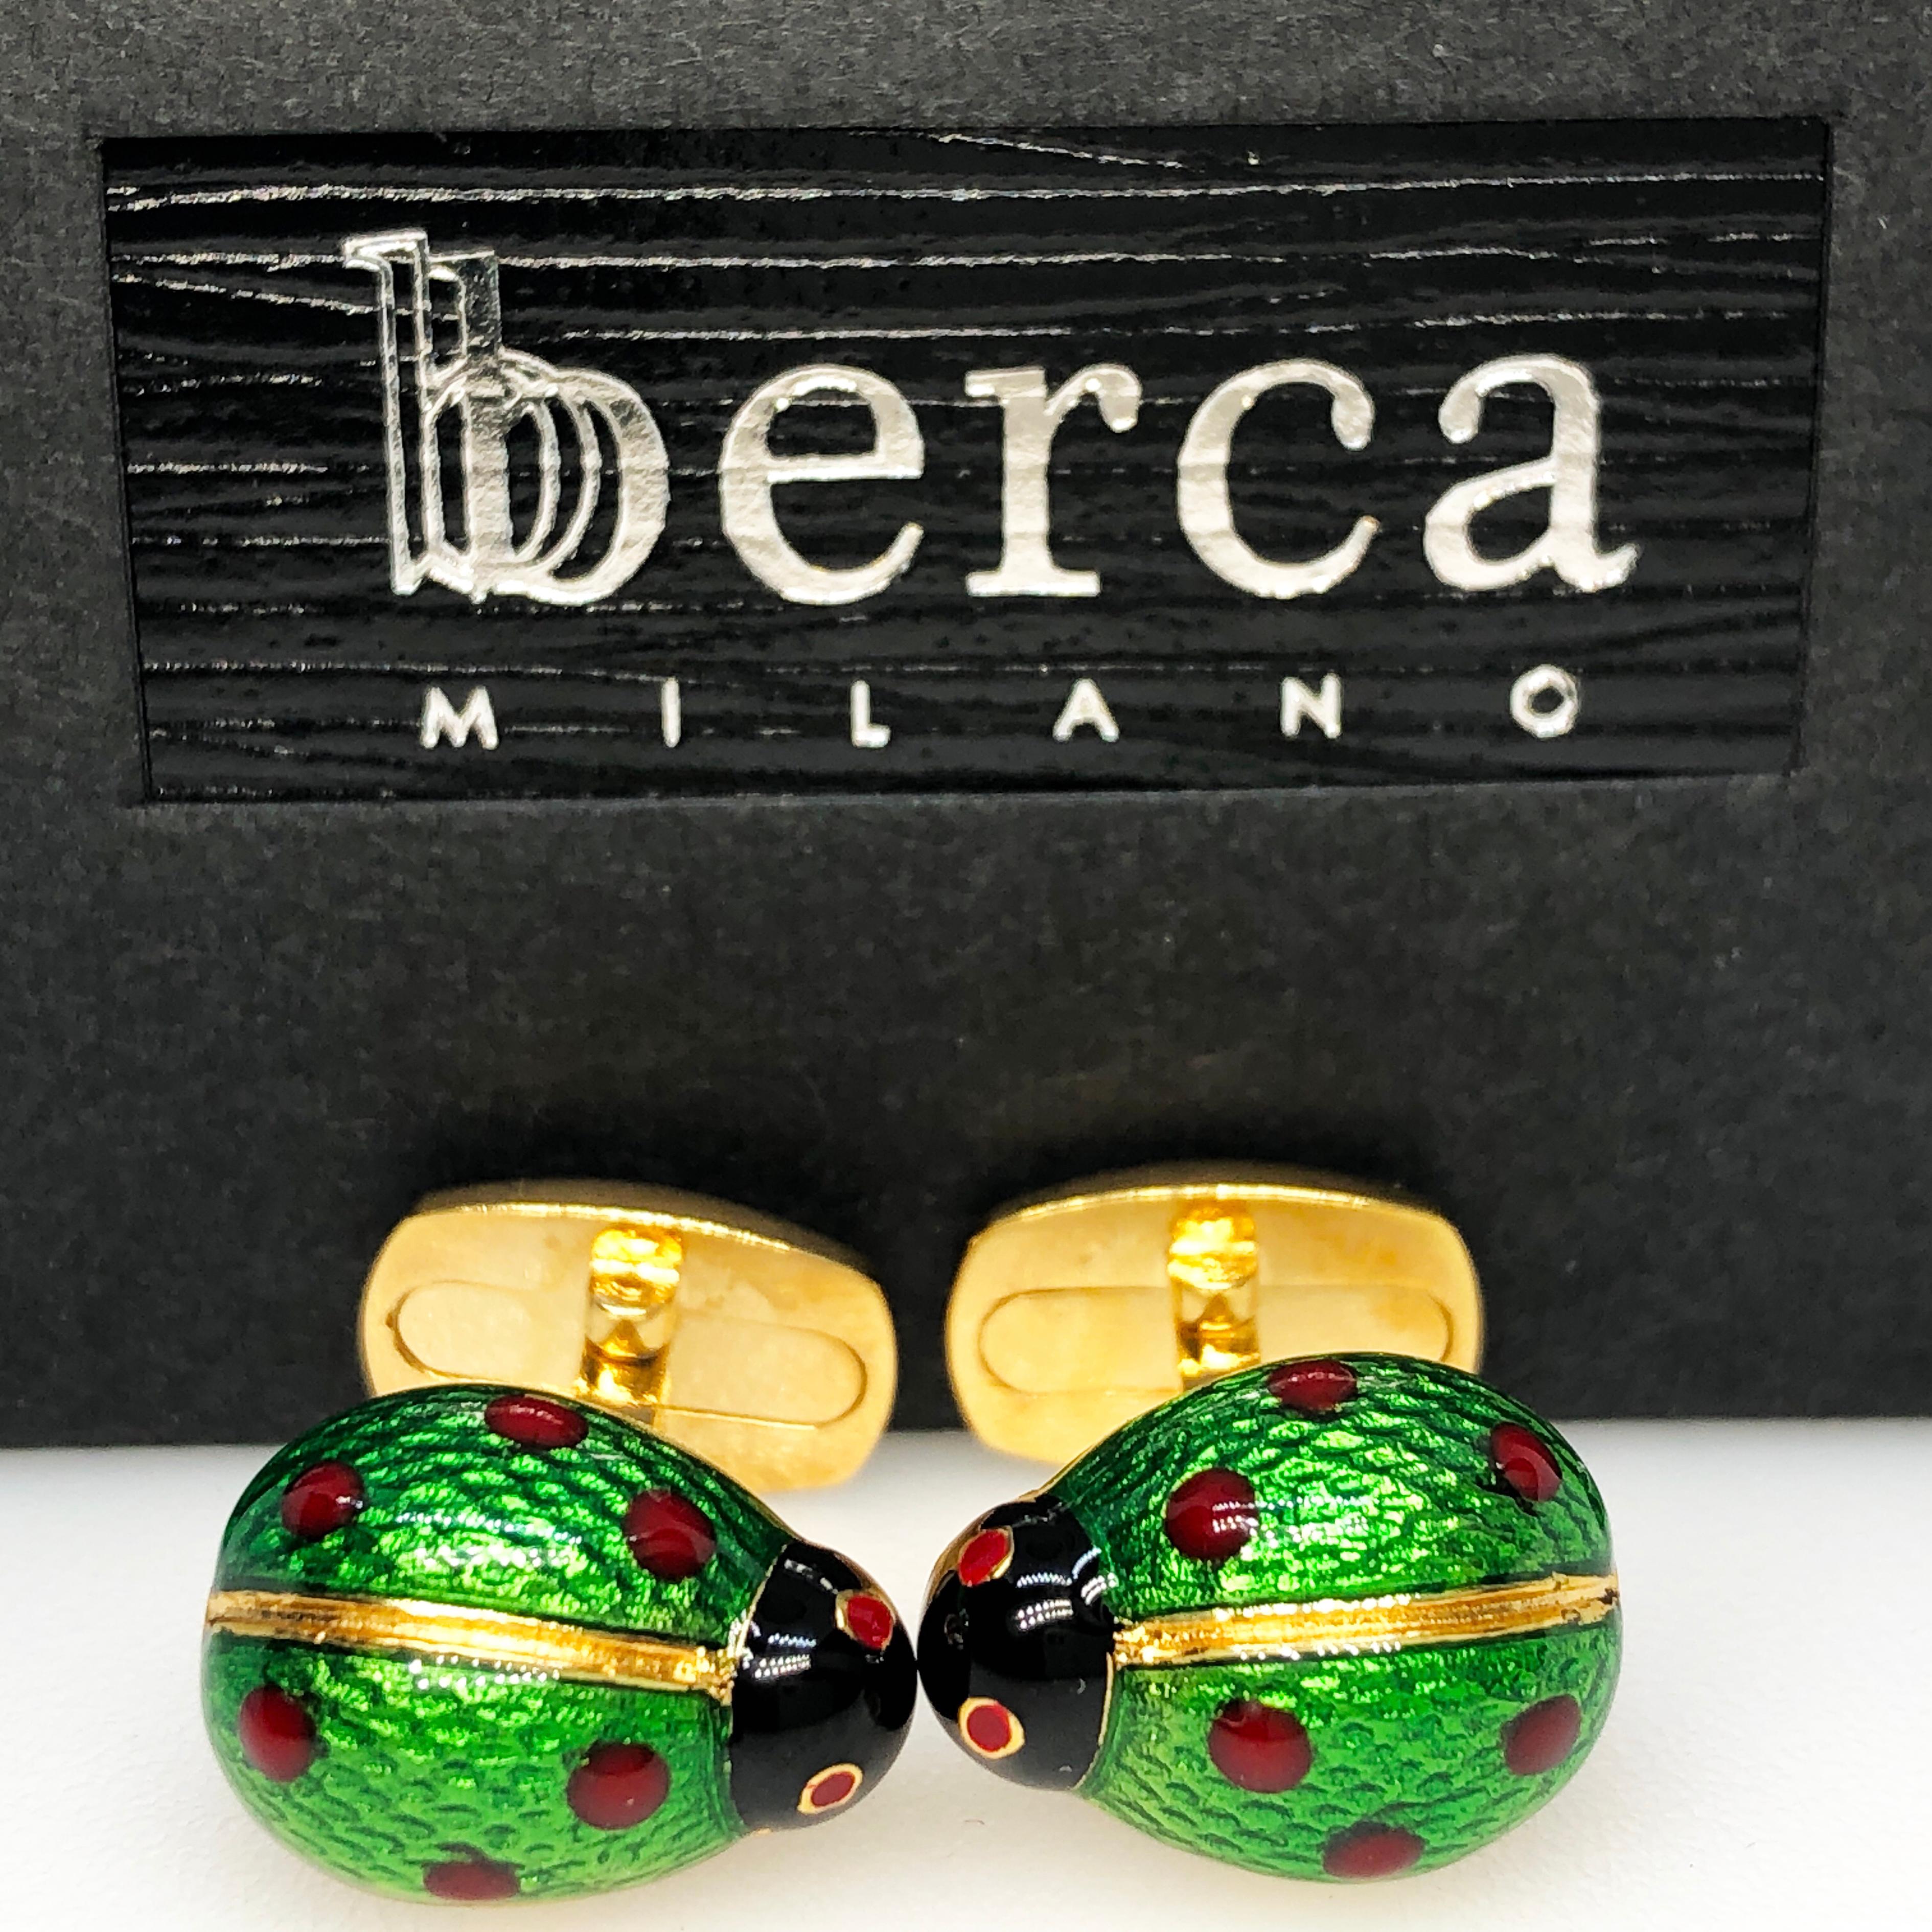 Chic Green Red Spot Hand Enameled Little Ladybug Shaped T-Bar Back, Sterling Silver Gold Plated Cufflinks.
In our smart Black Box and Pouch.


